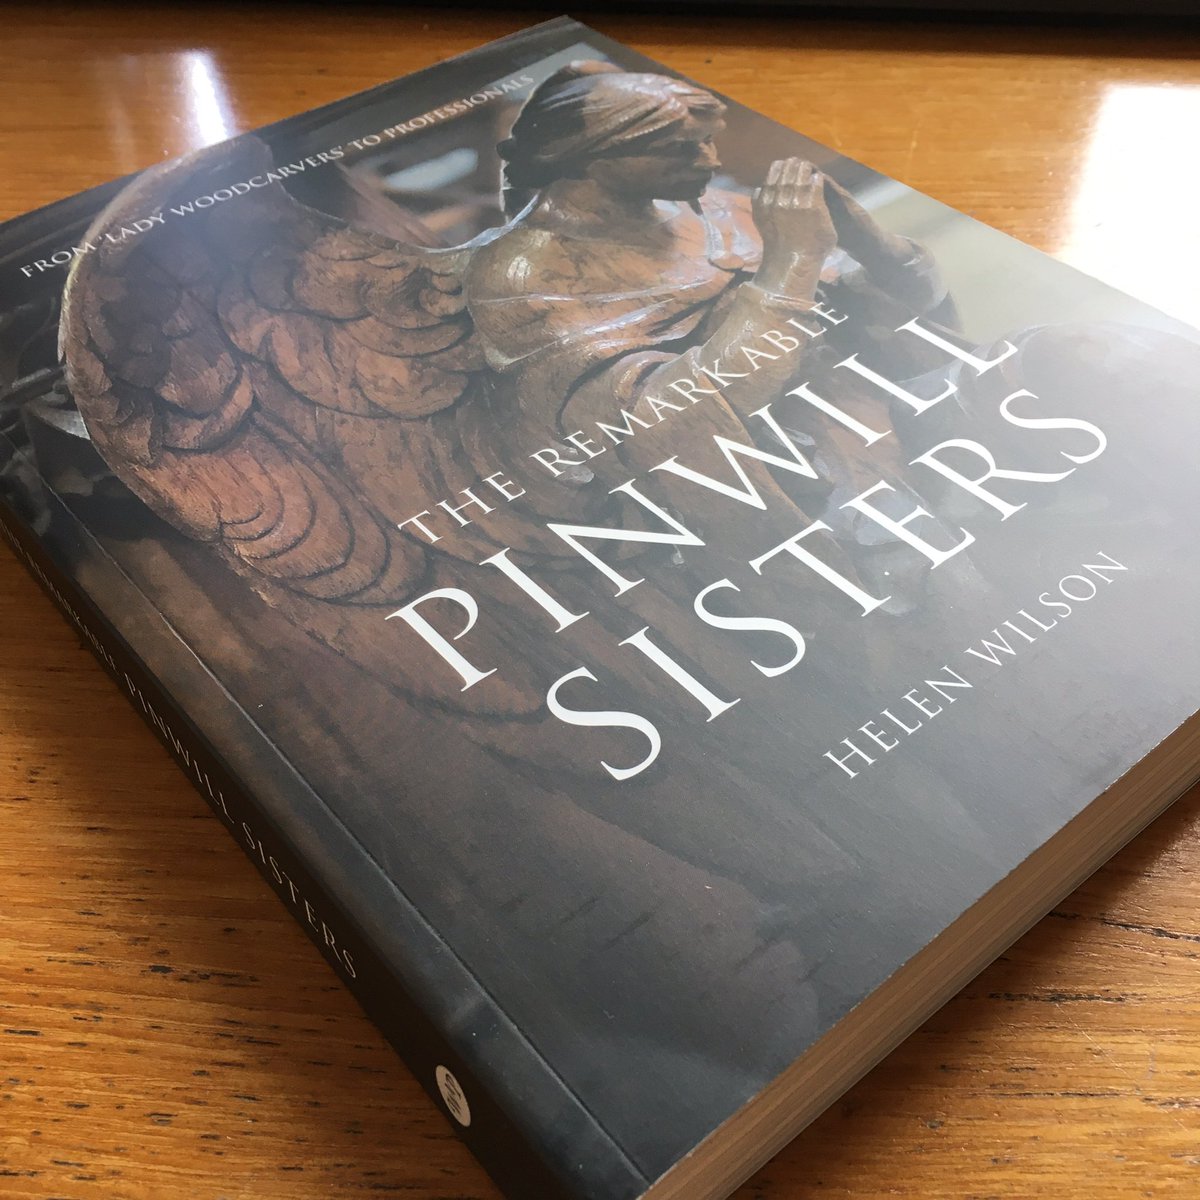 We had this lovely book come in this week. 
#bookpost
#HappyLibrarian
#NewBooks 
#PinwillSisters
#ArtsAndCraftsMovement